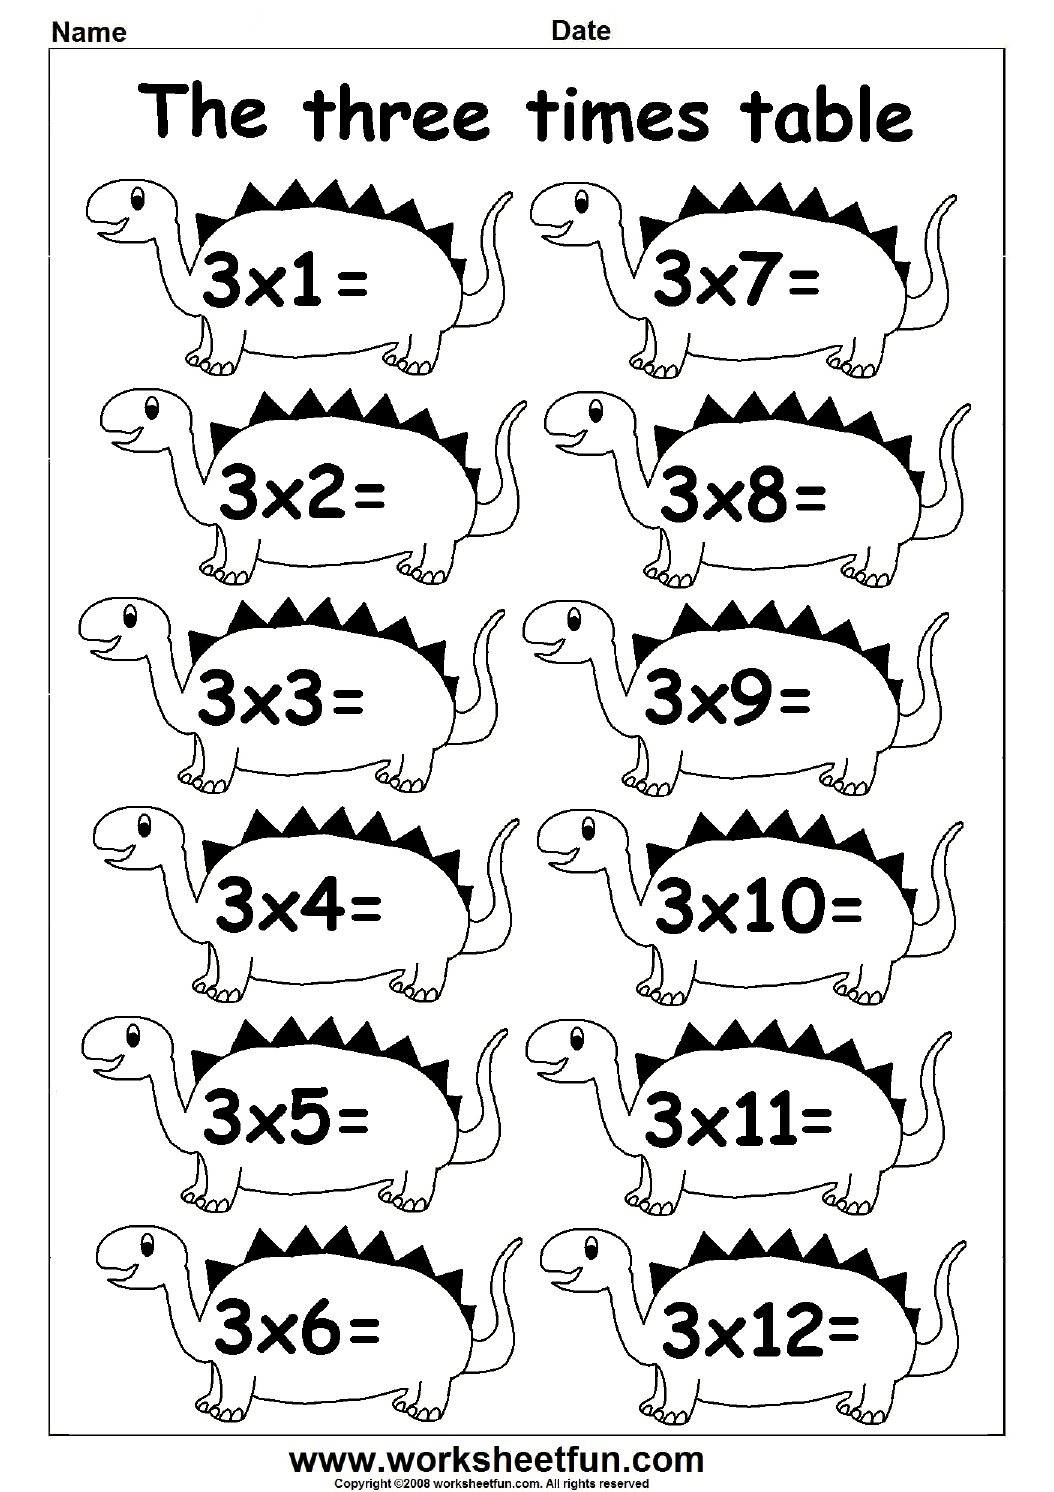 Multiplication Times Tables Worksheets – 11, 11, 11 & 11 Times Tables Inside 3 Times Table Worksheet